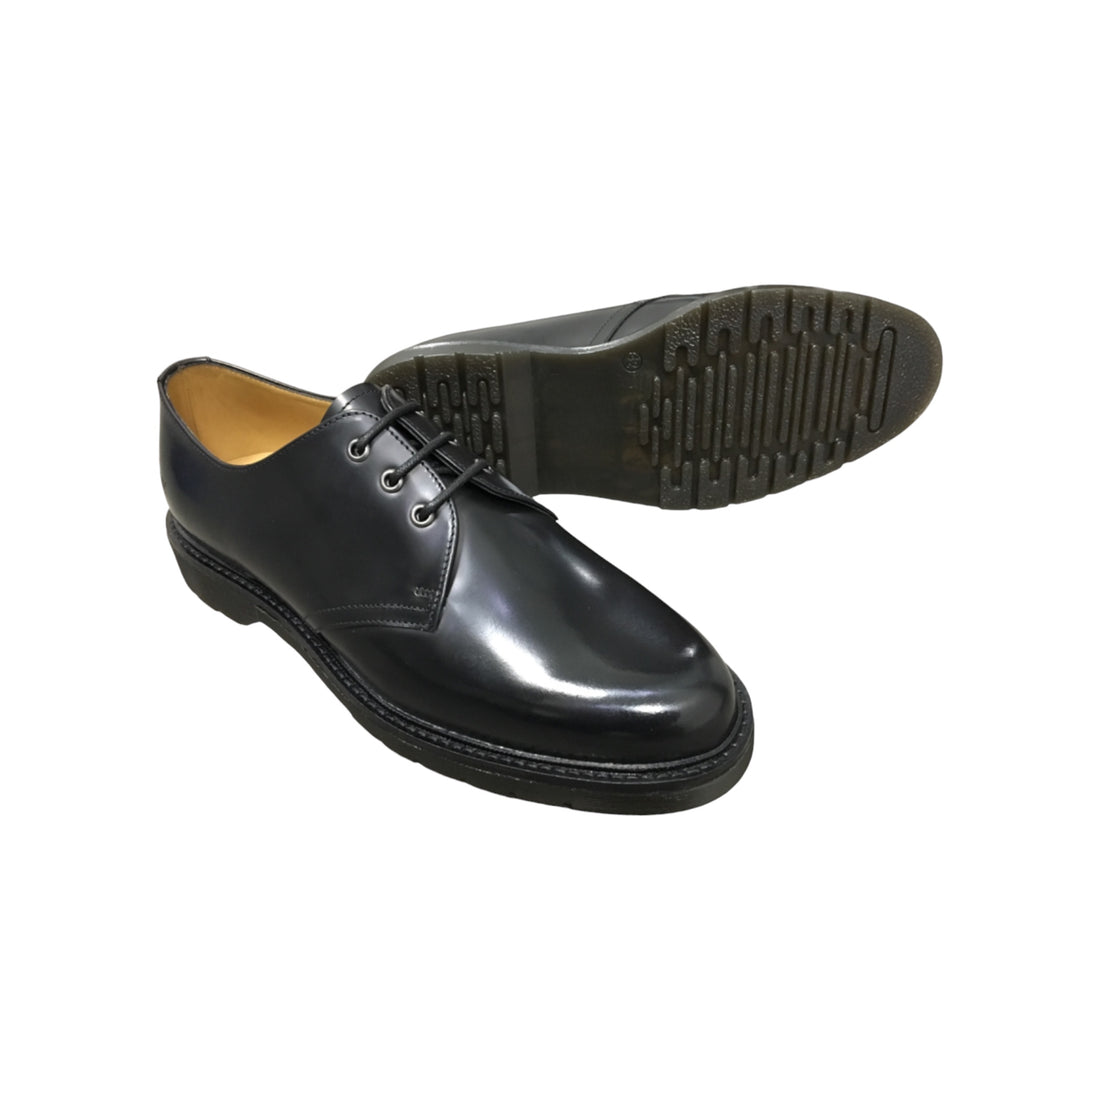 George formal leather shoes.